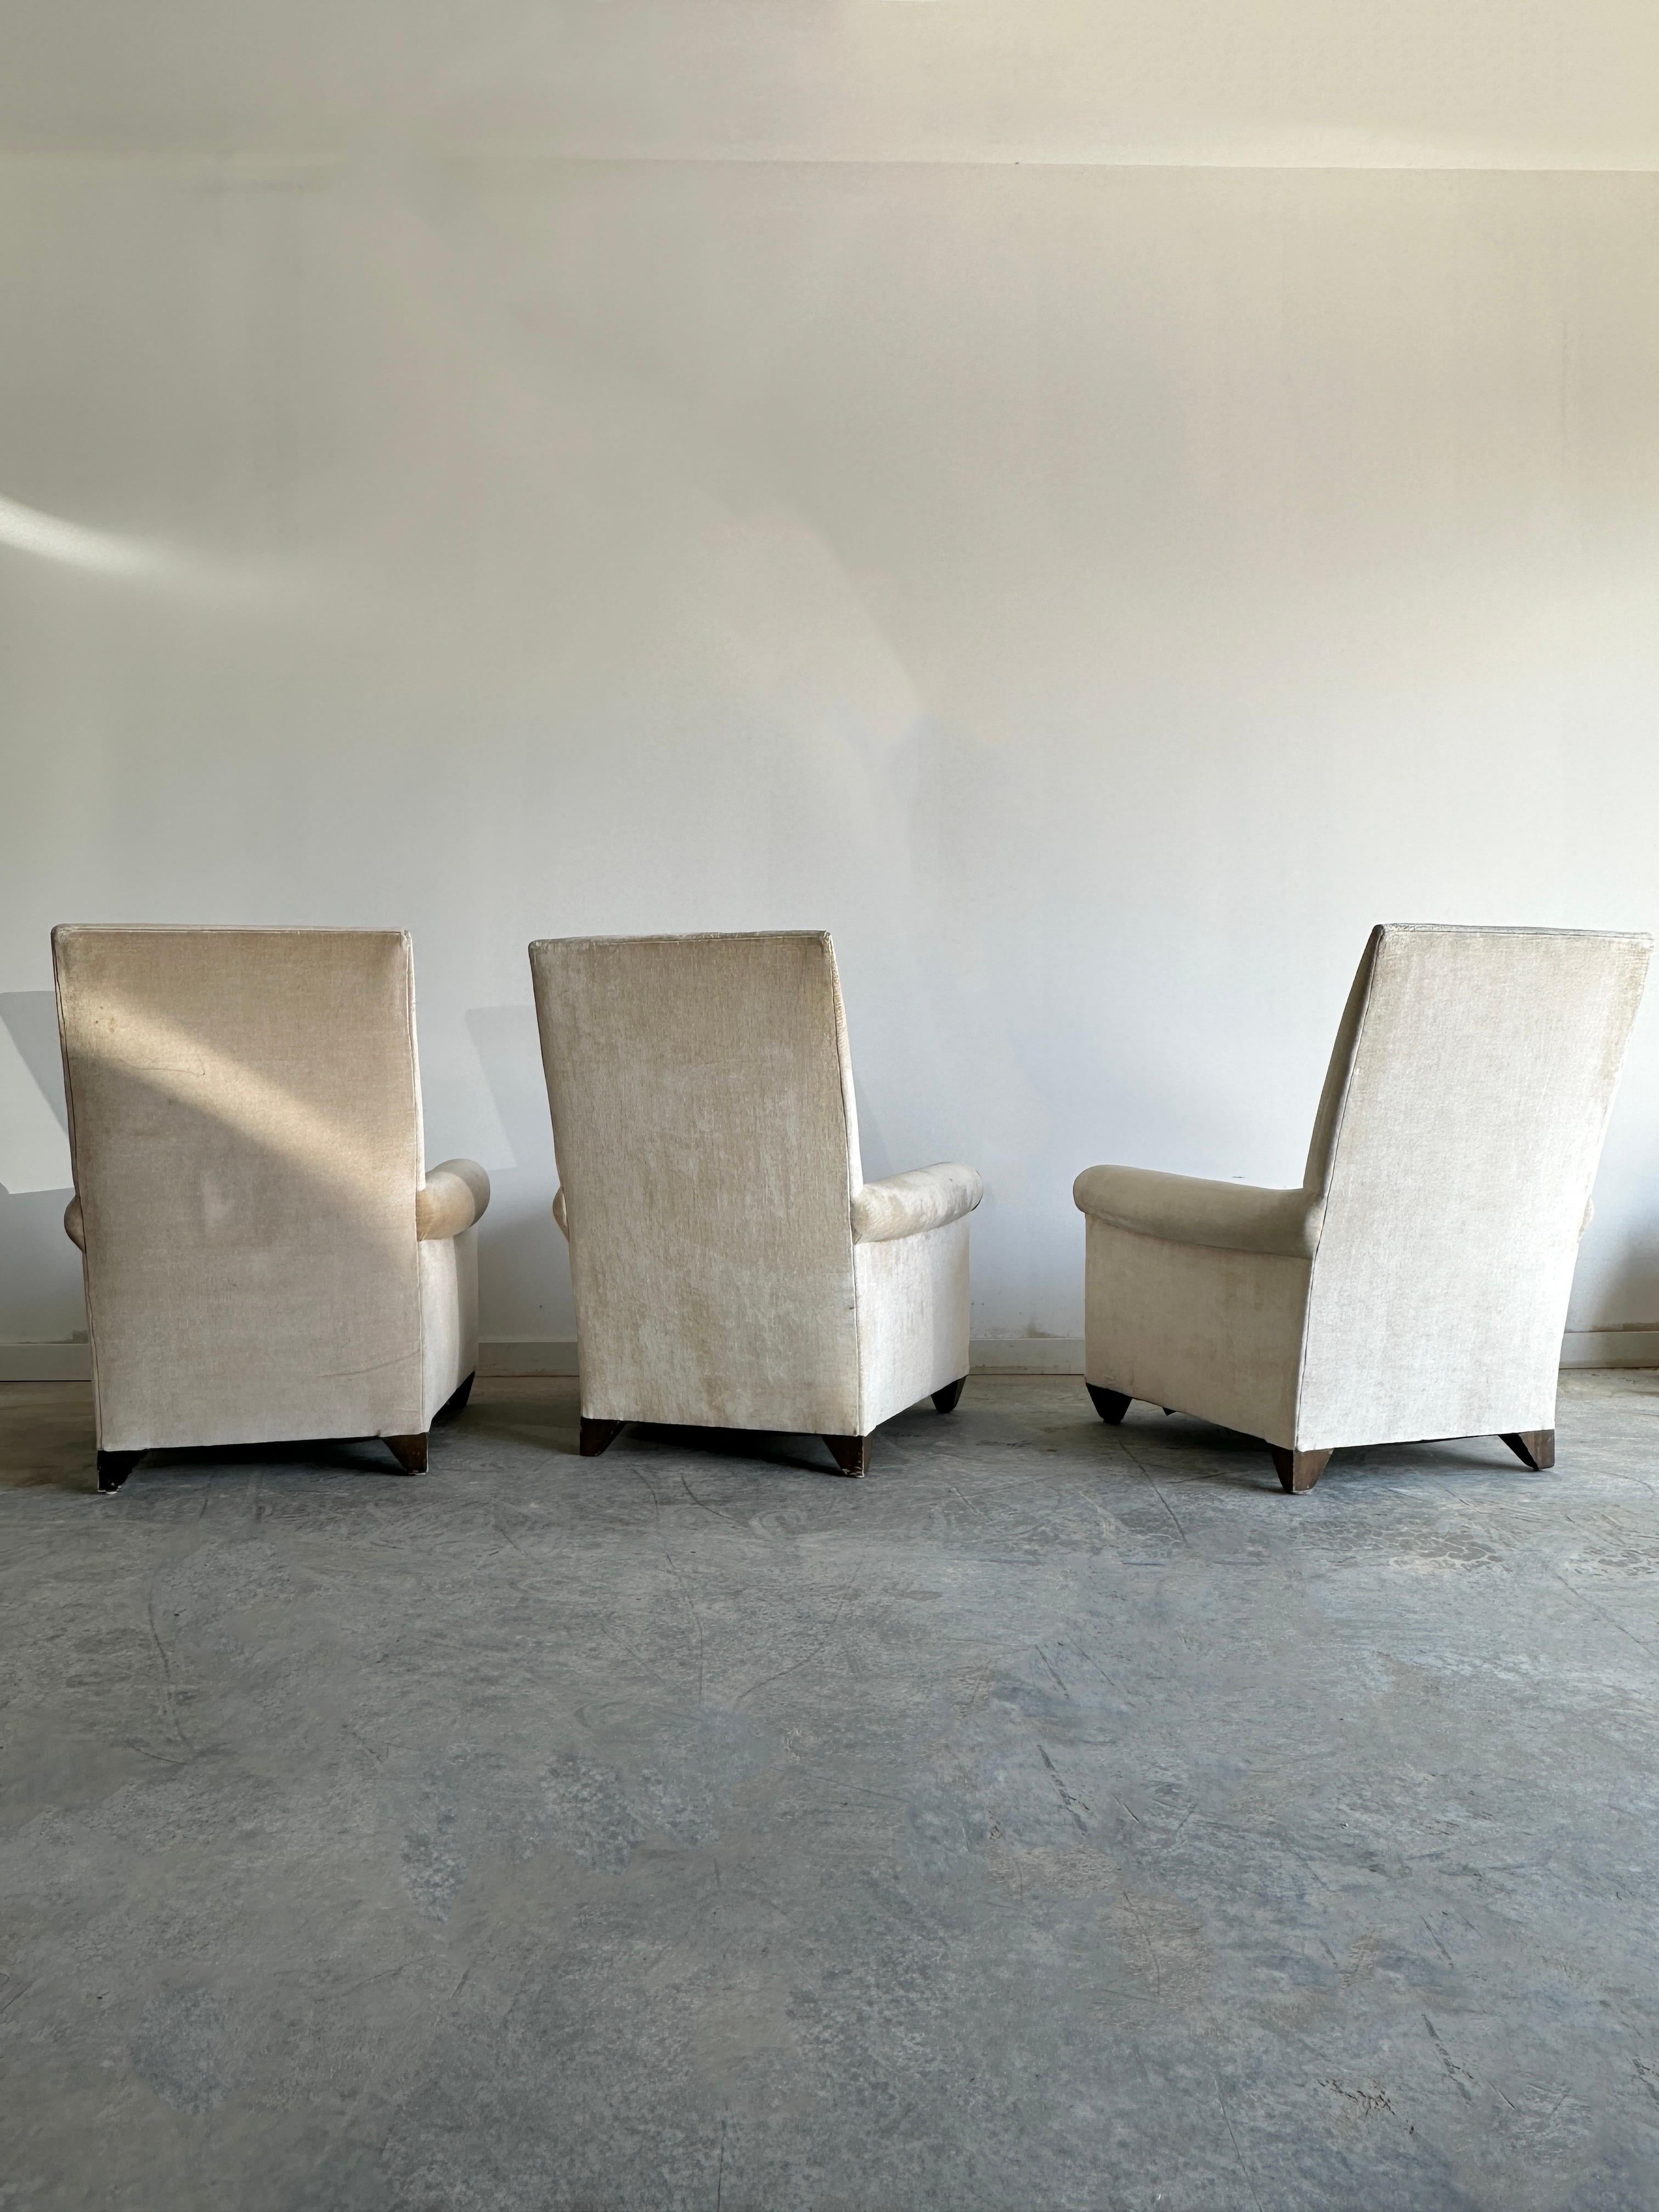 Three elegant and very comfortable arm chairs that featuring deep cushions, tall back and high quality textured velvet fabric. The chairs have a sleek and modern design that reflects the style of the their creator, Angelo Donghia, who was known for